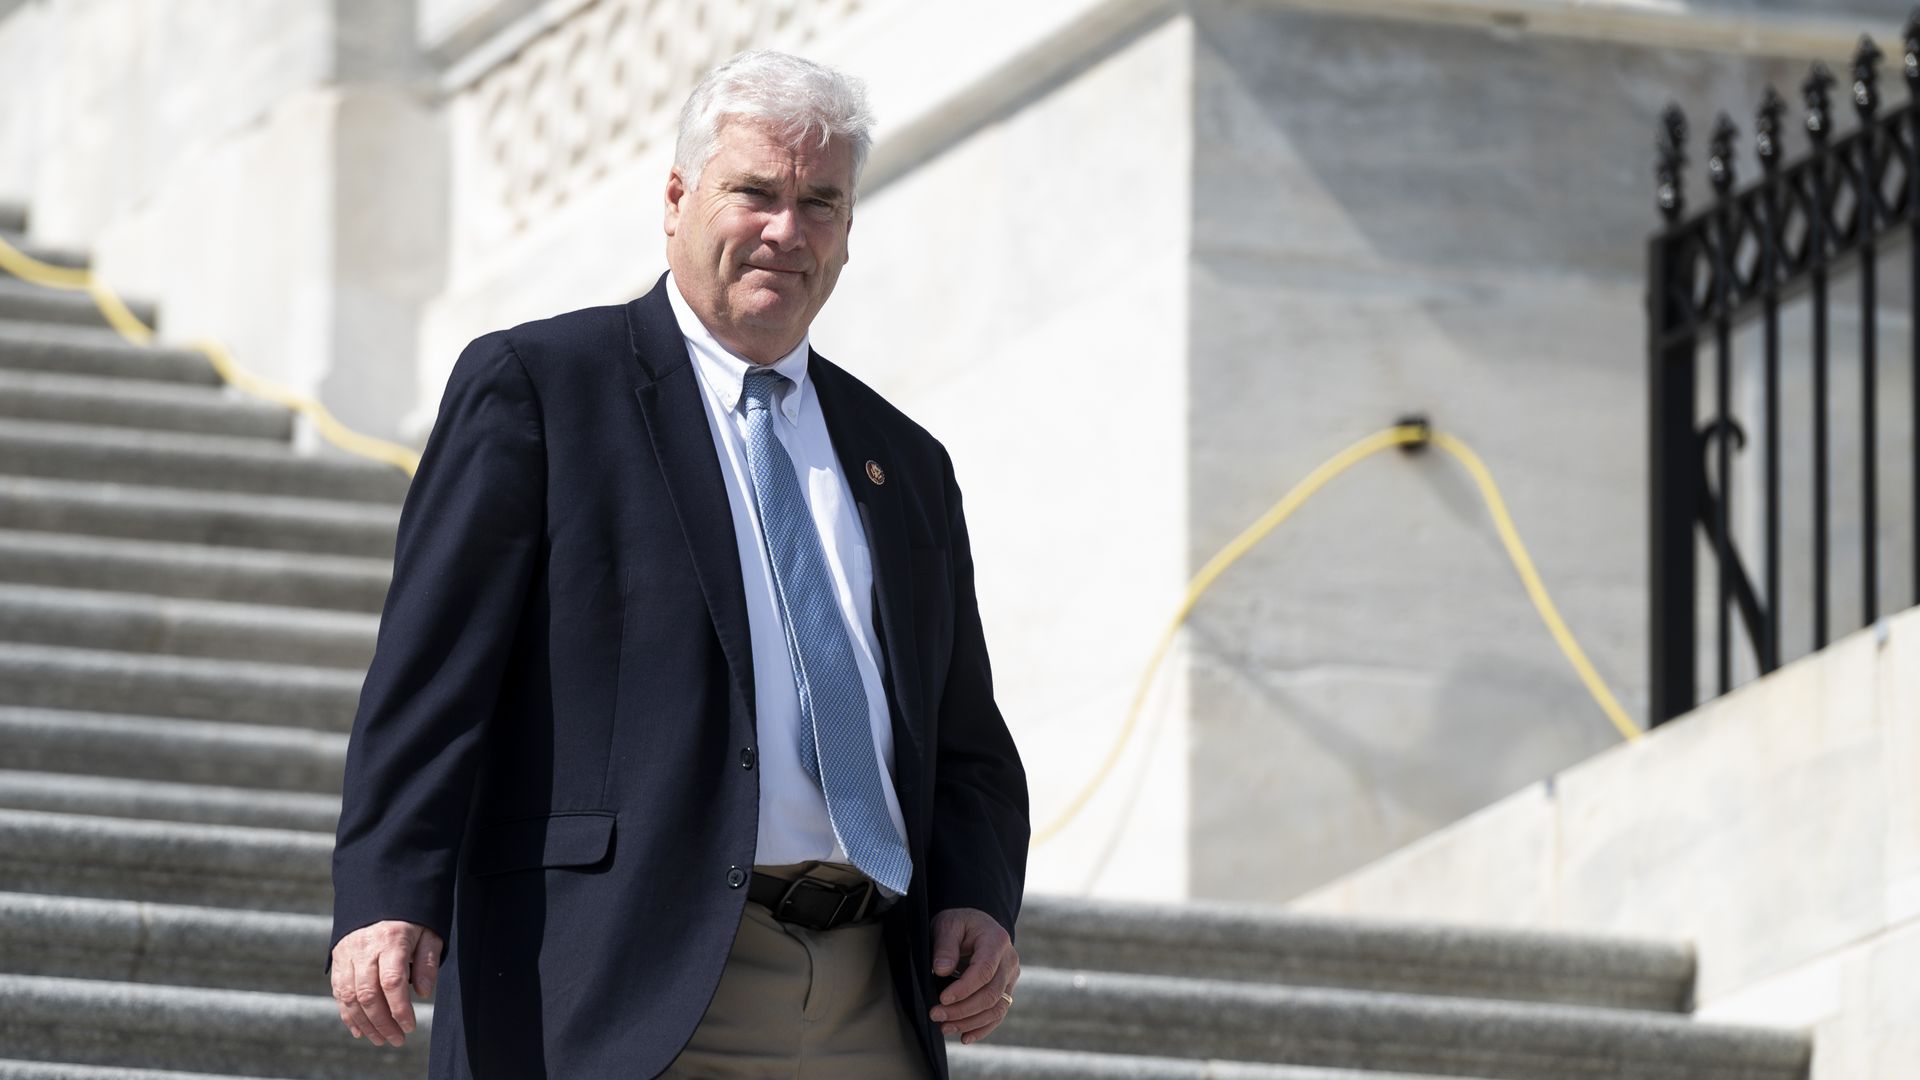  Rep. Tom Emmer, R-Minn., walks down the House steps after a vote